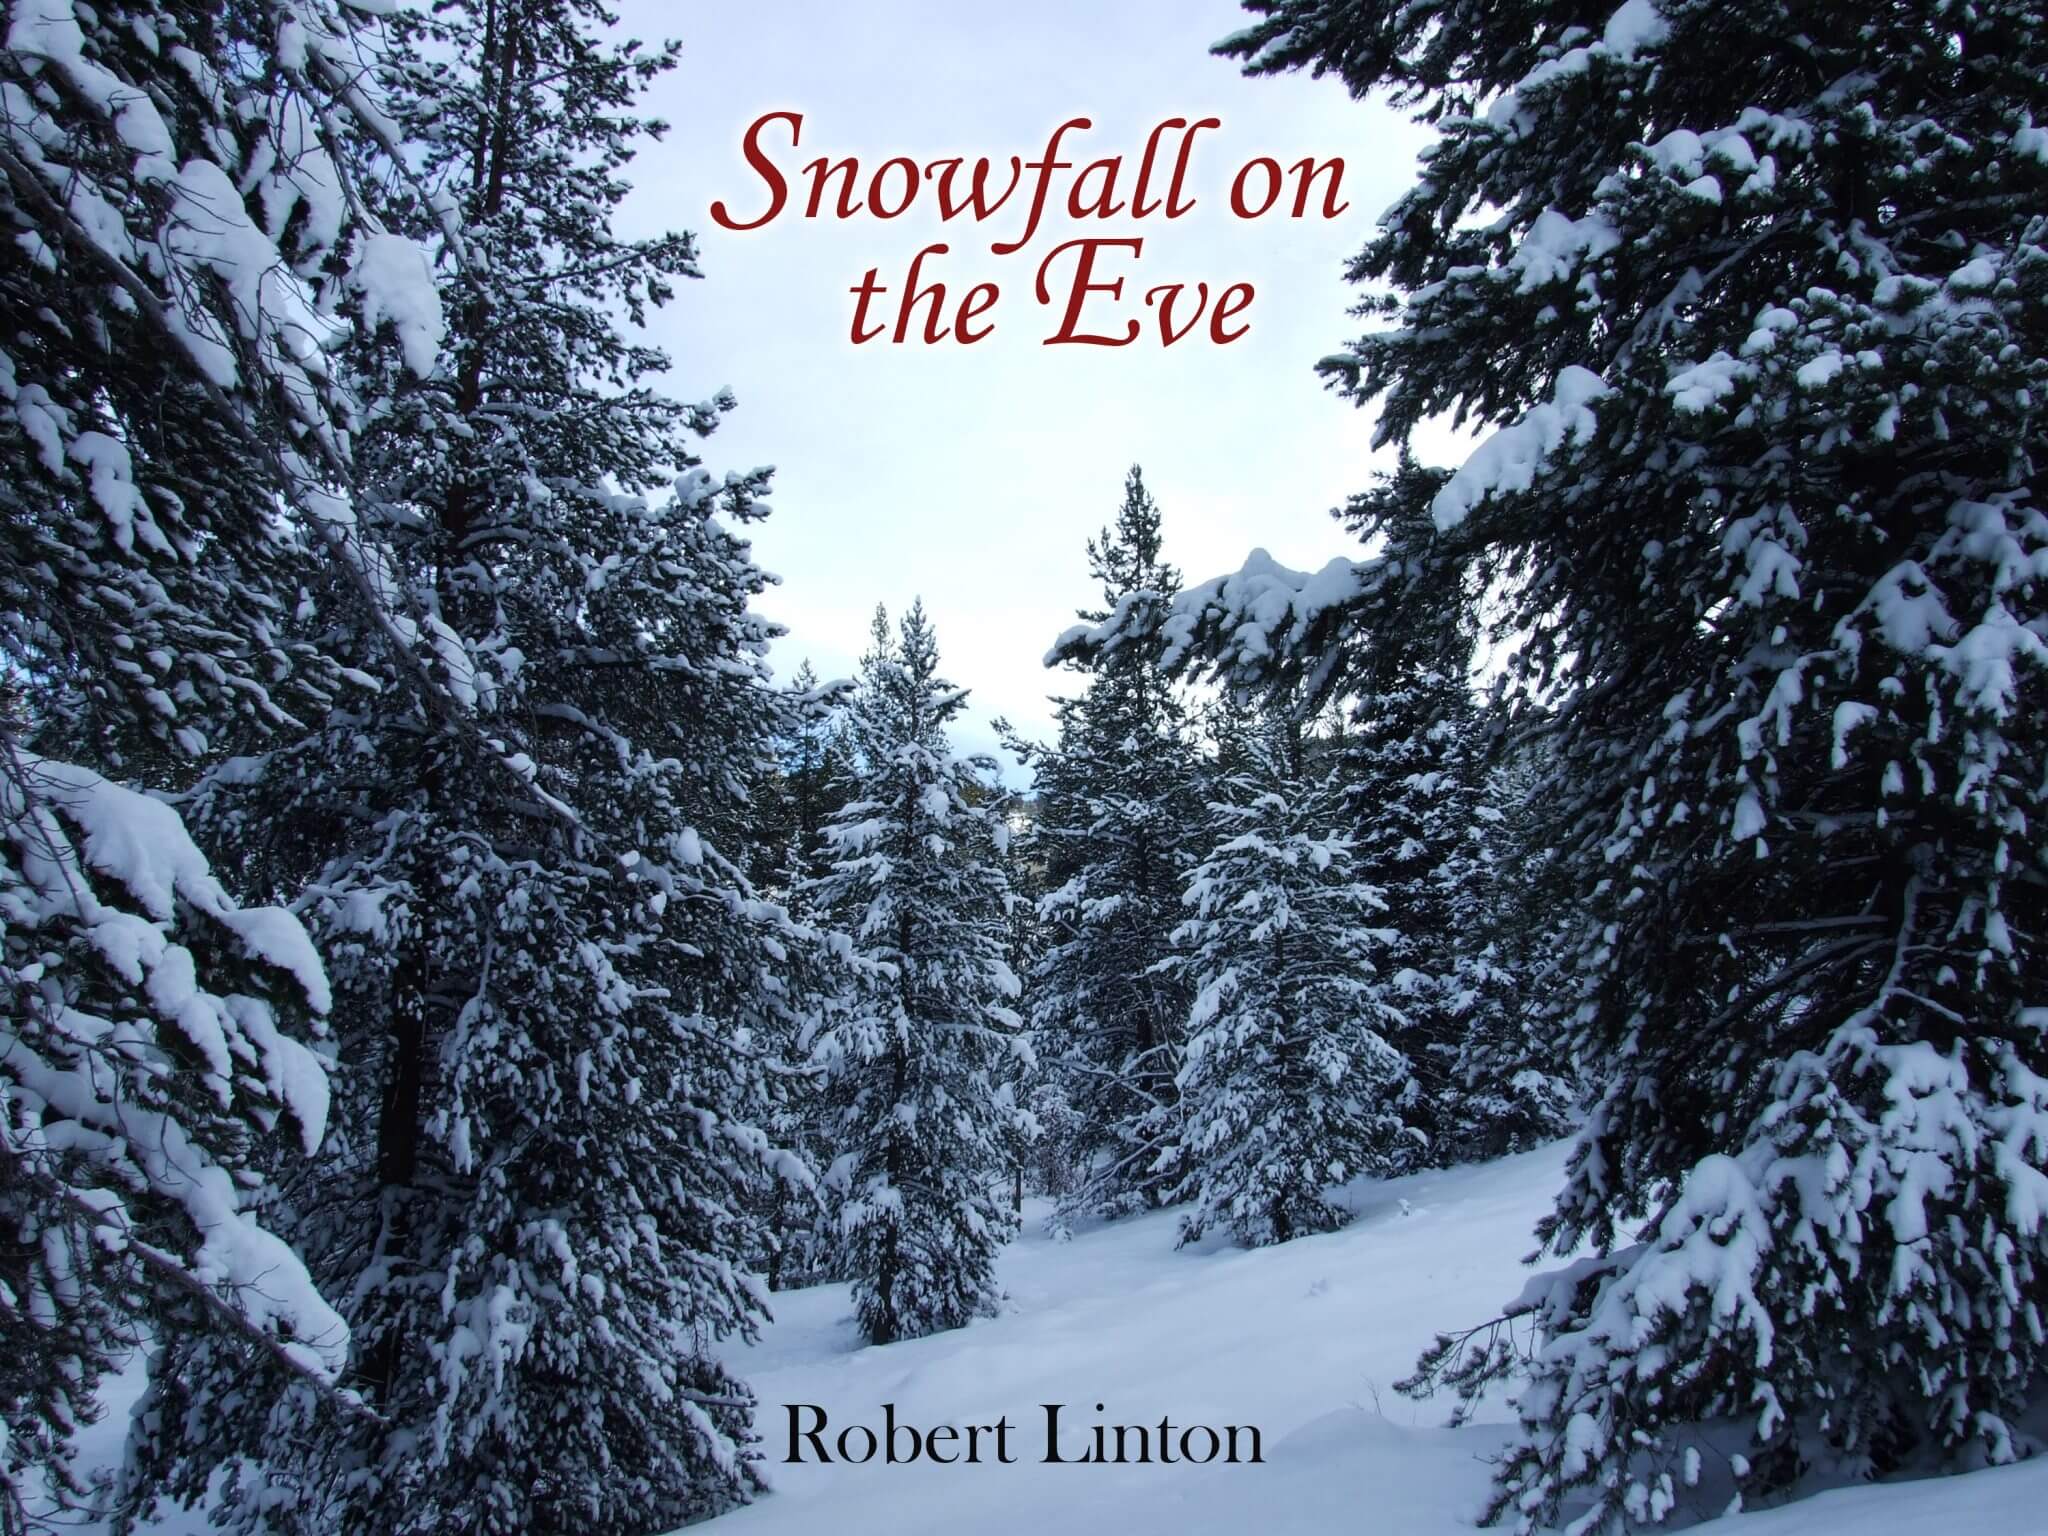 Relaxing soothing Holiday single Robert Linton